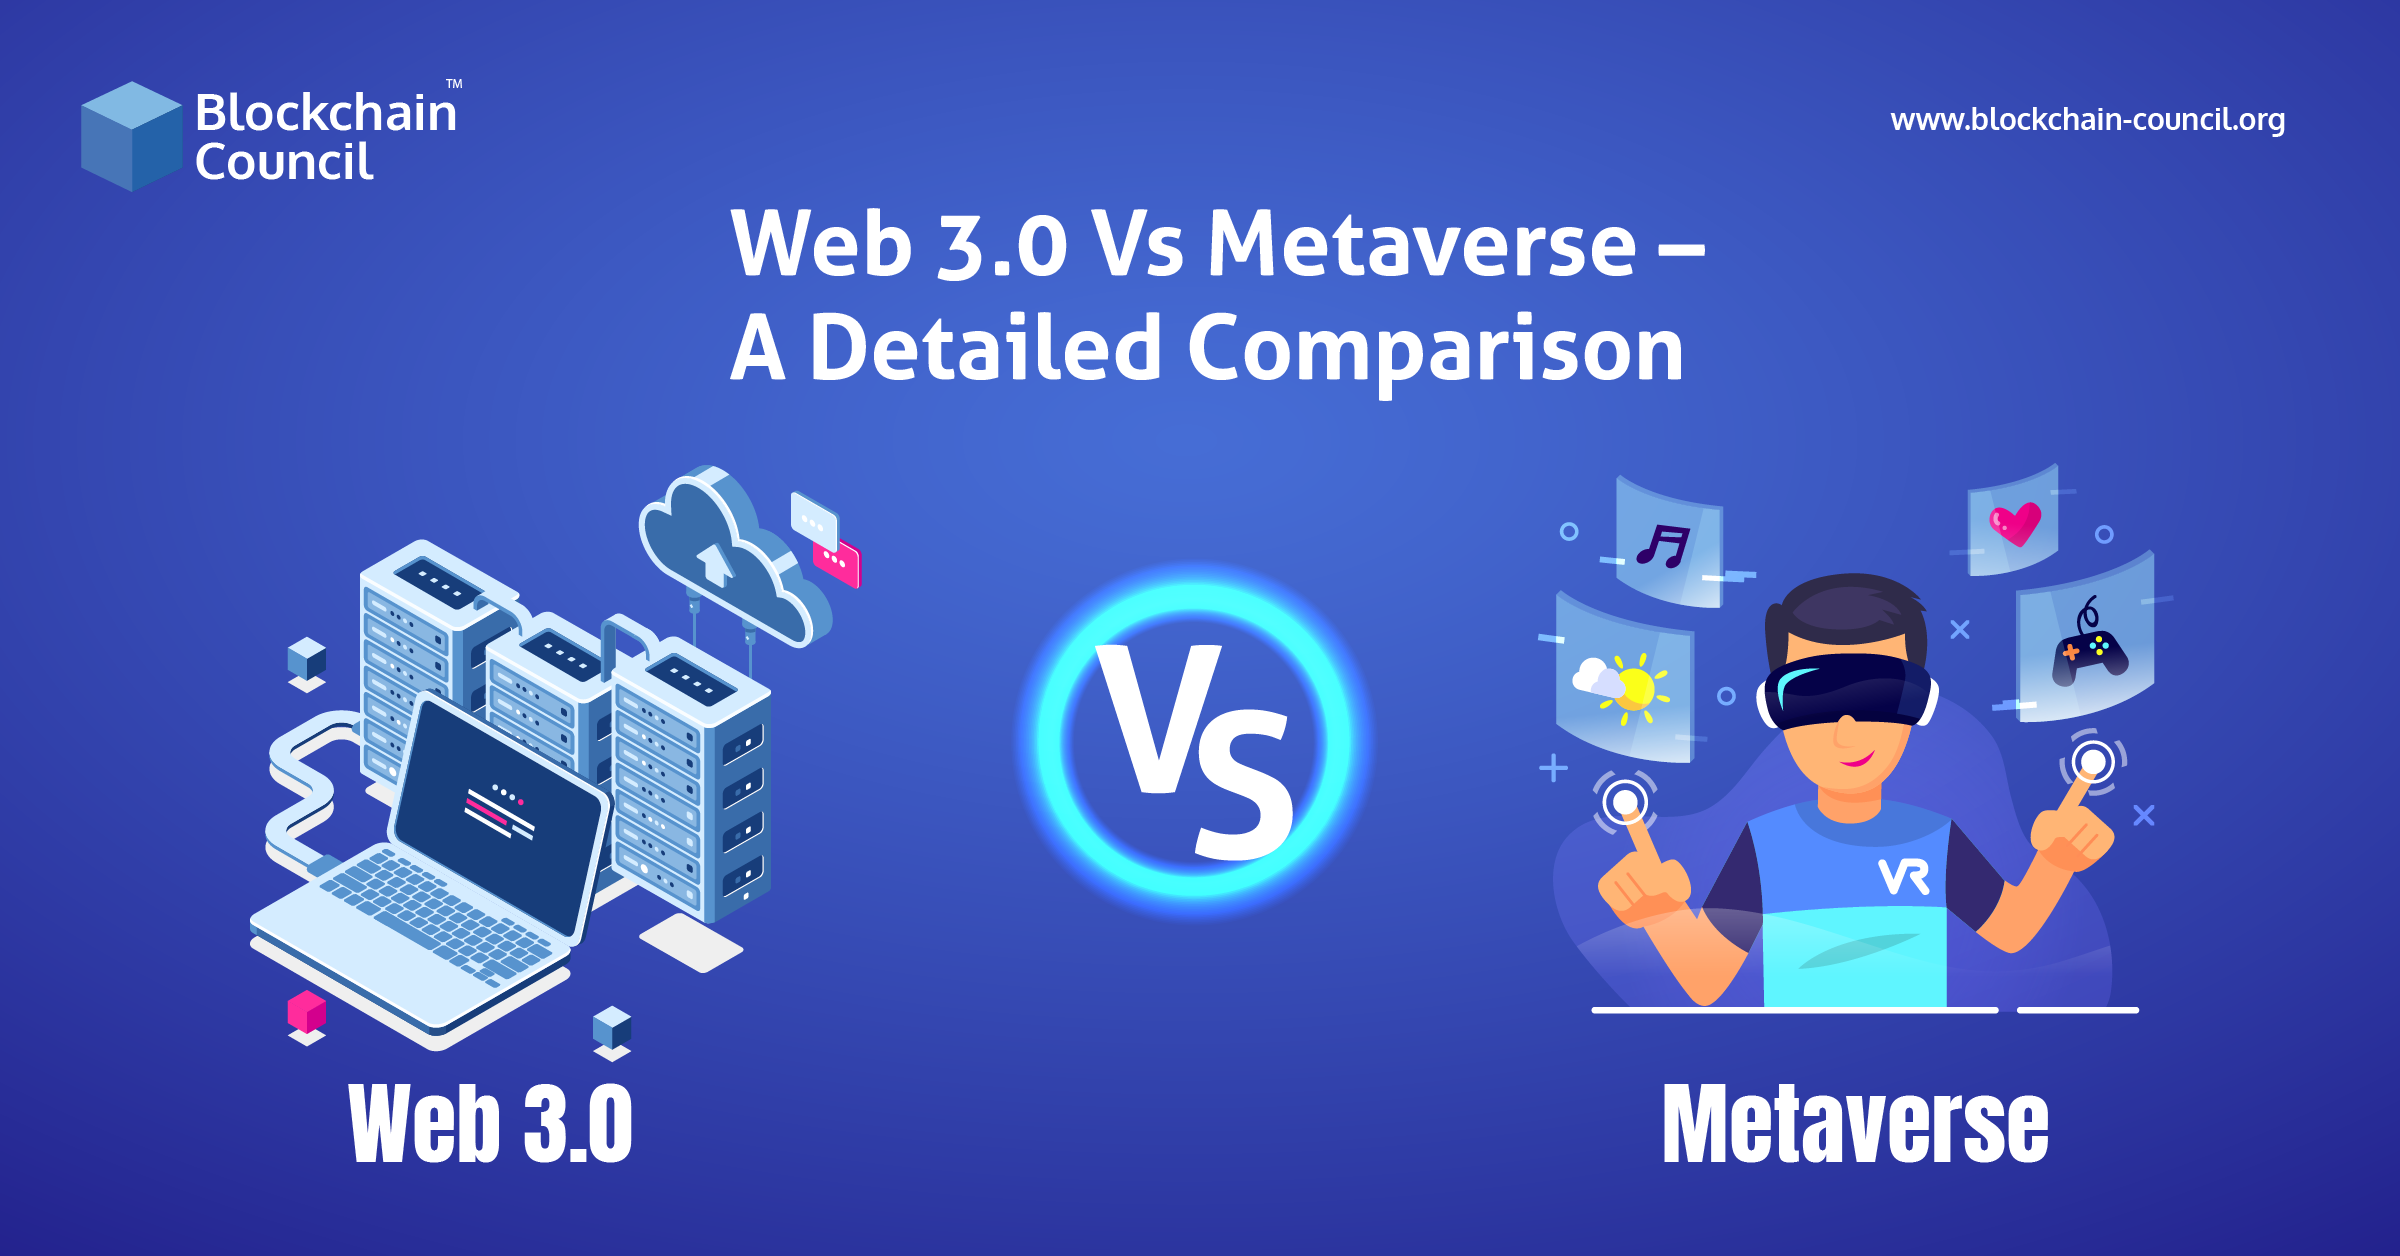 Is Web 3.0 related to metaverse?